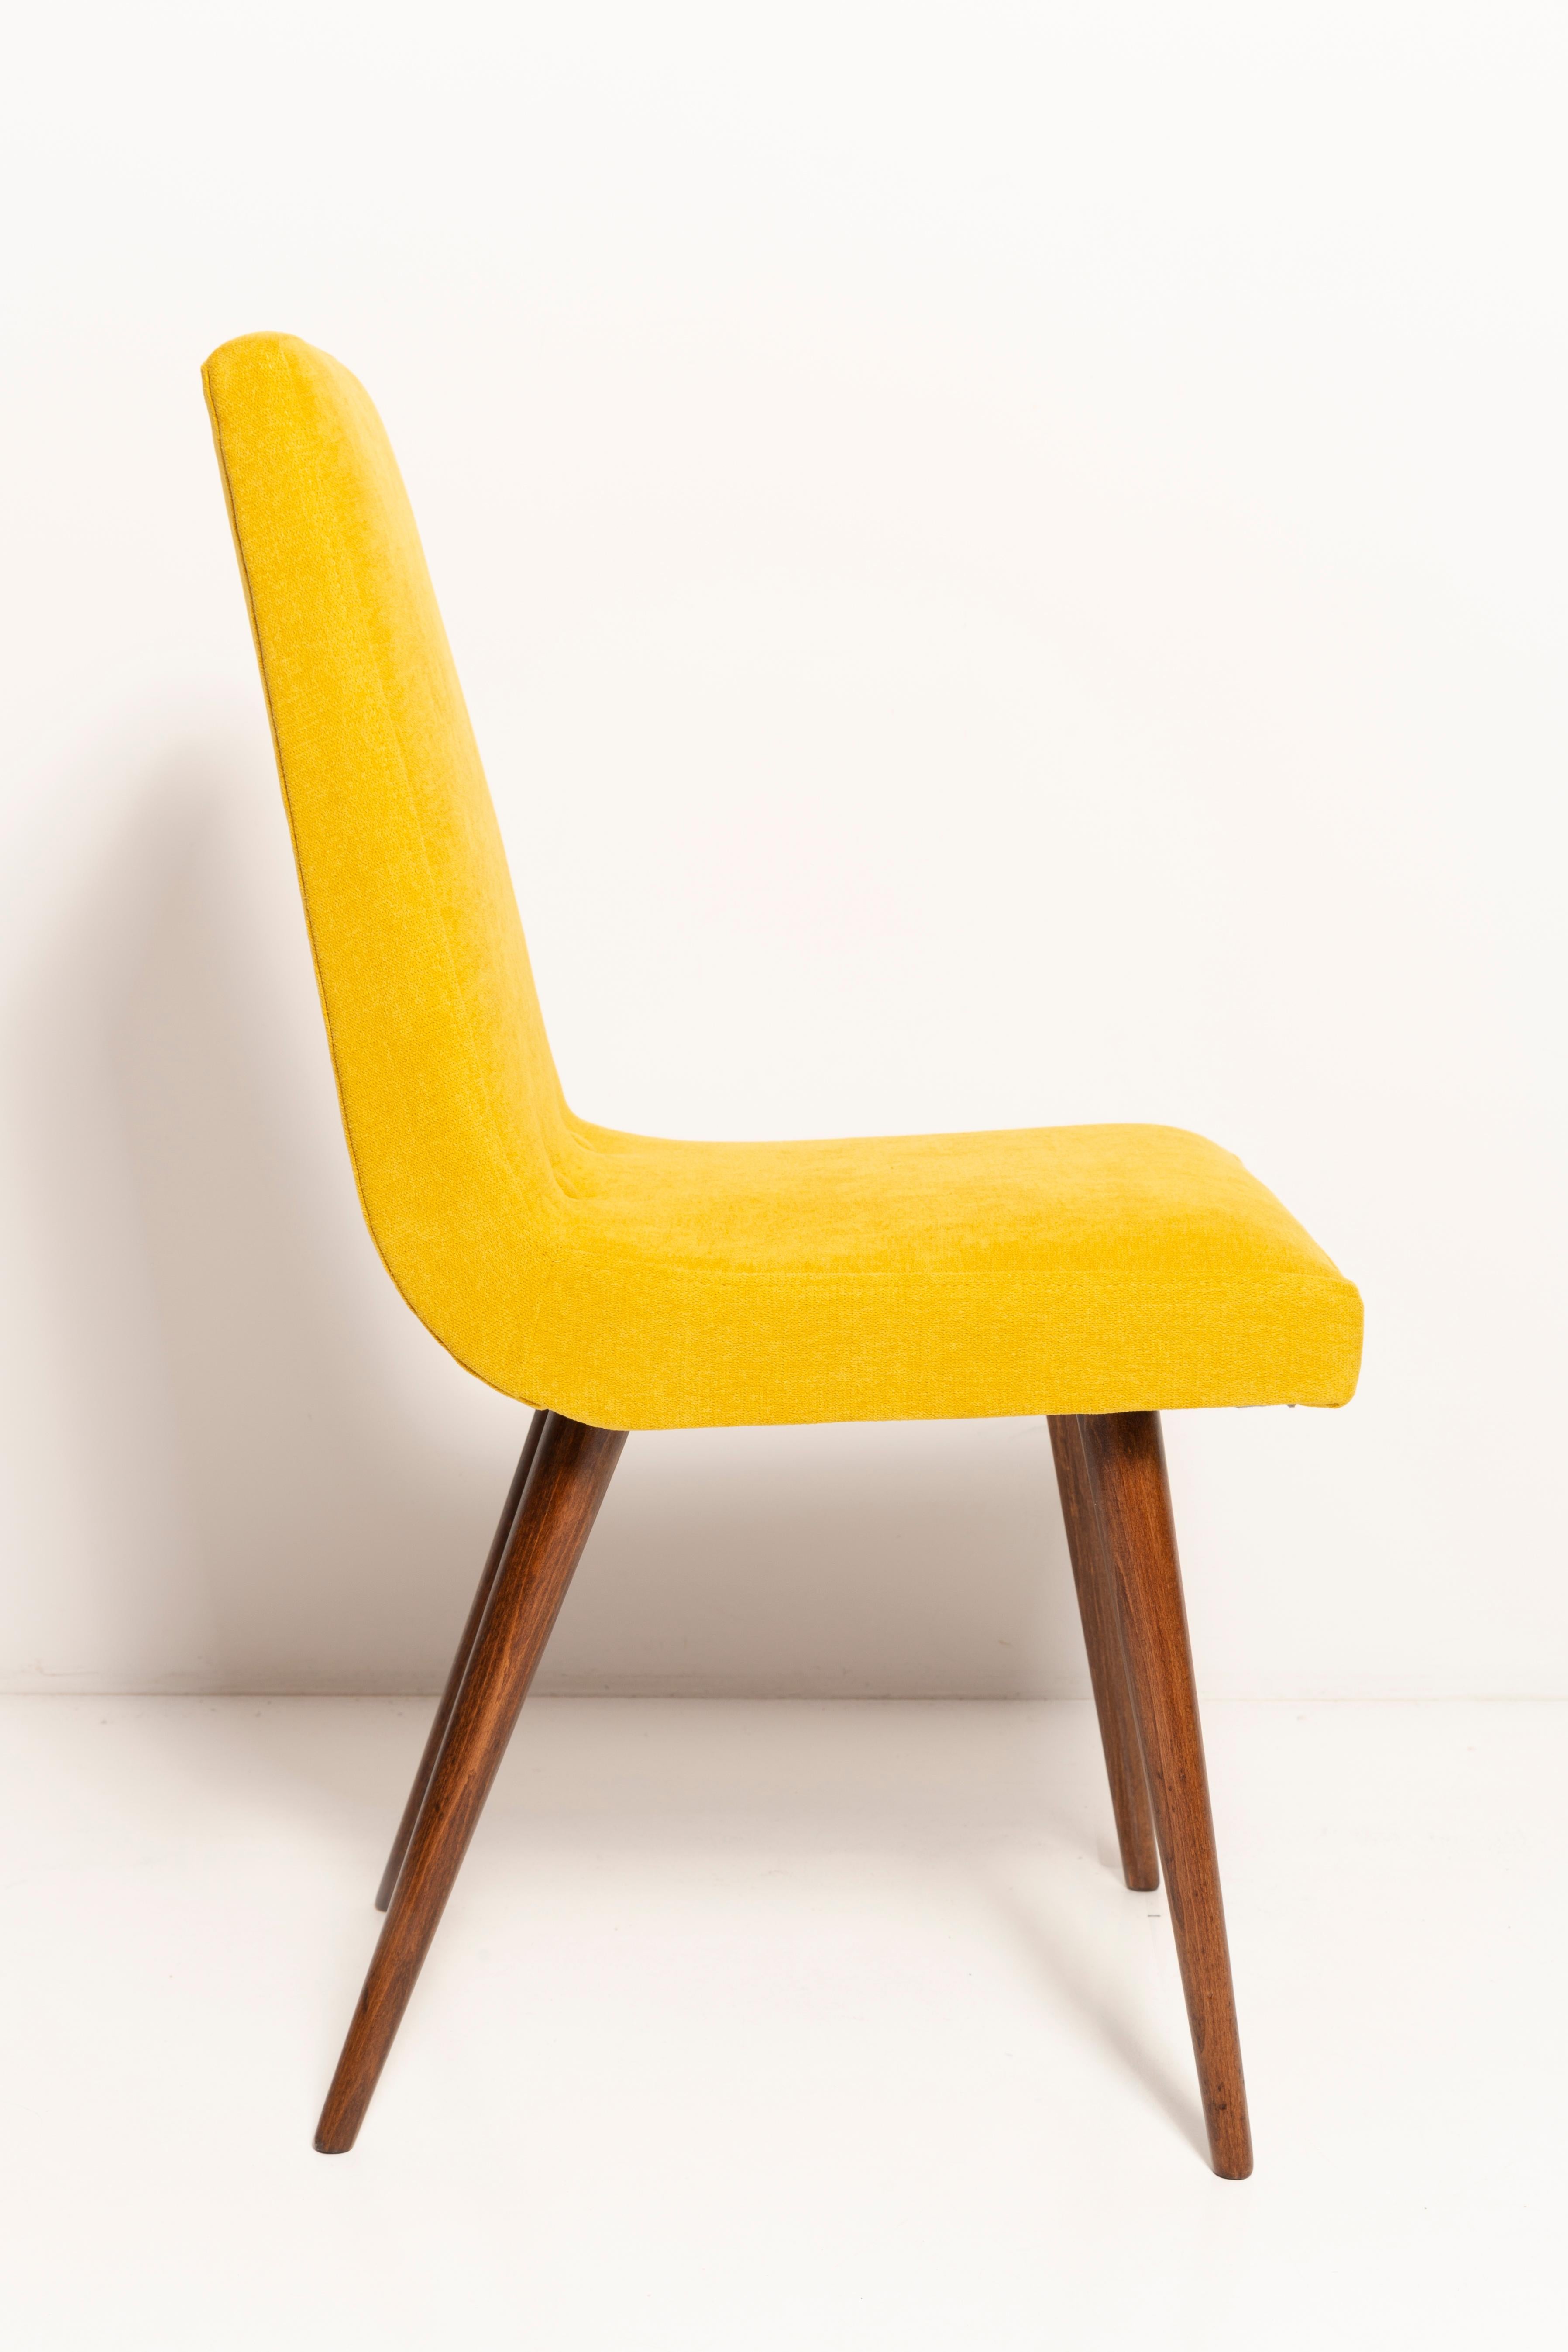 Hand-Crafted 20th Century Mustard Yellow Wool Chair, Rajmund Halas, Europe, 1960s For Sale